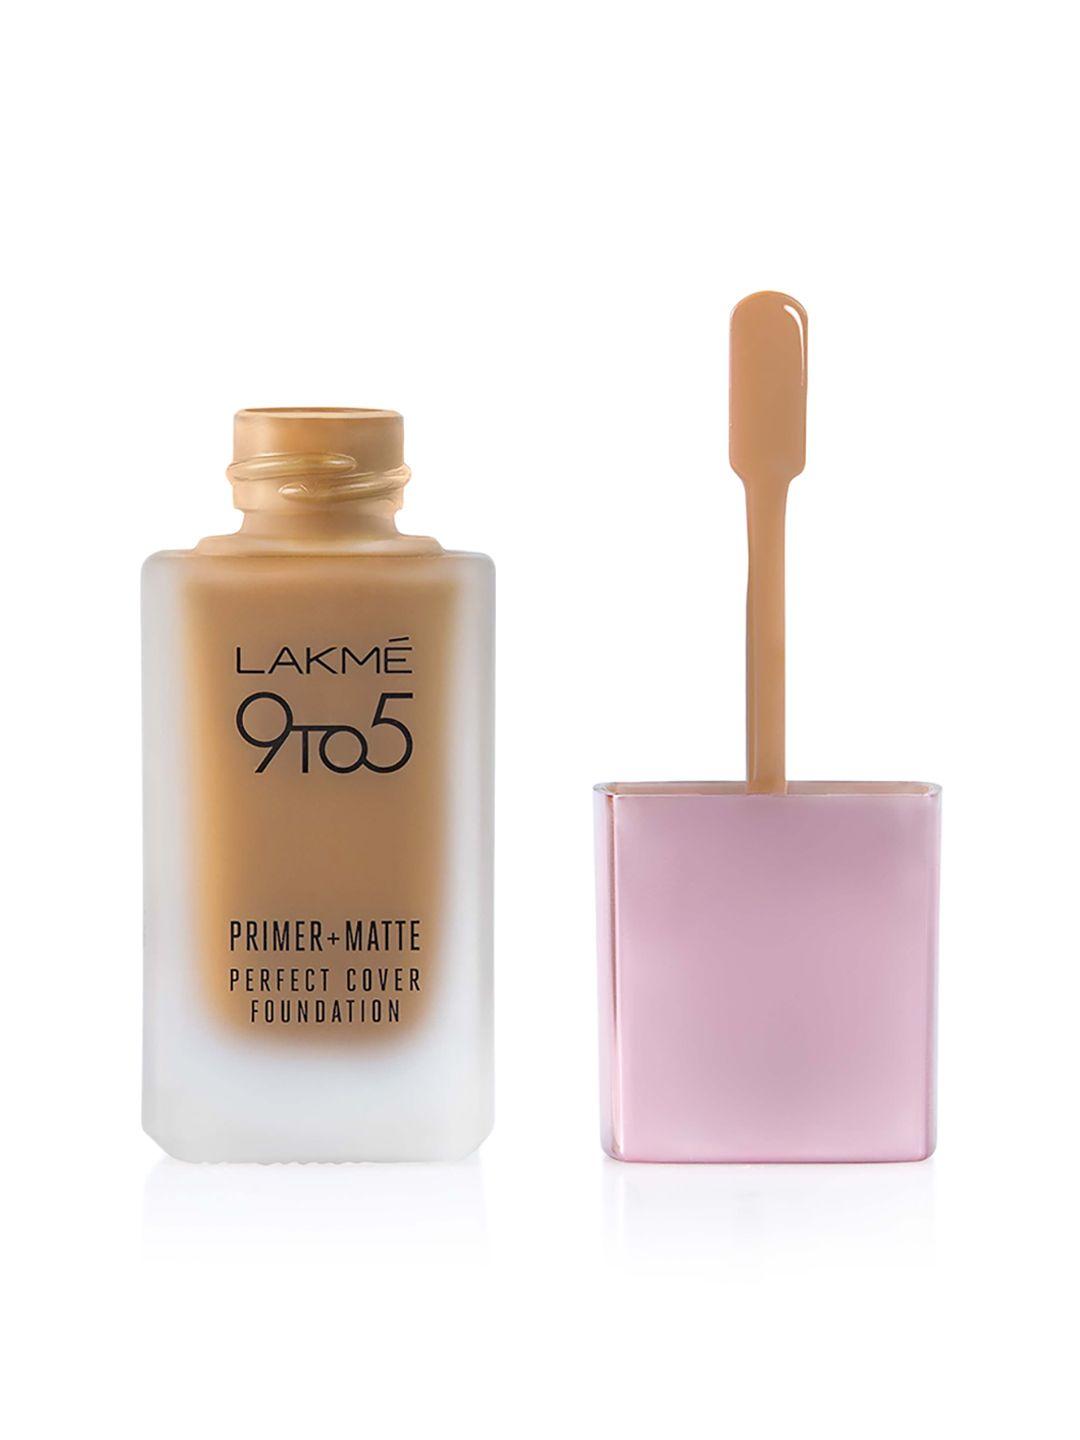 lakme 9 to 5 primer + matte perfect cover foundation - neutral almond n340